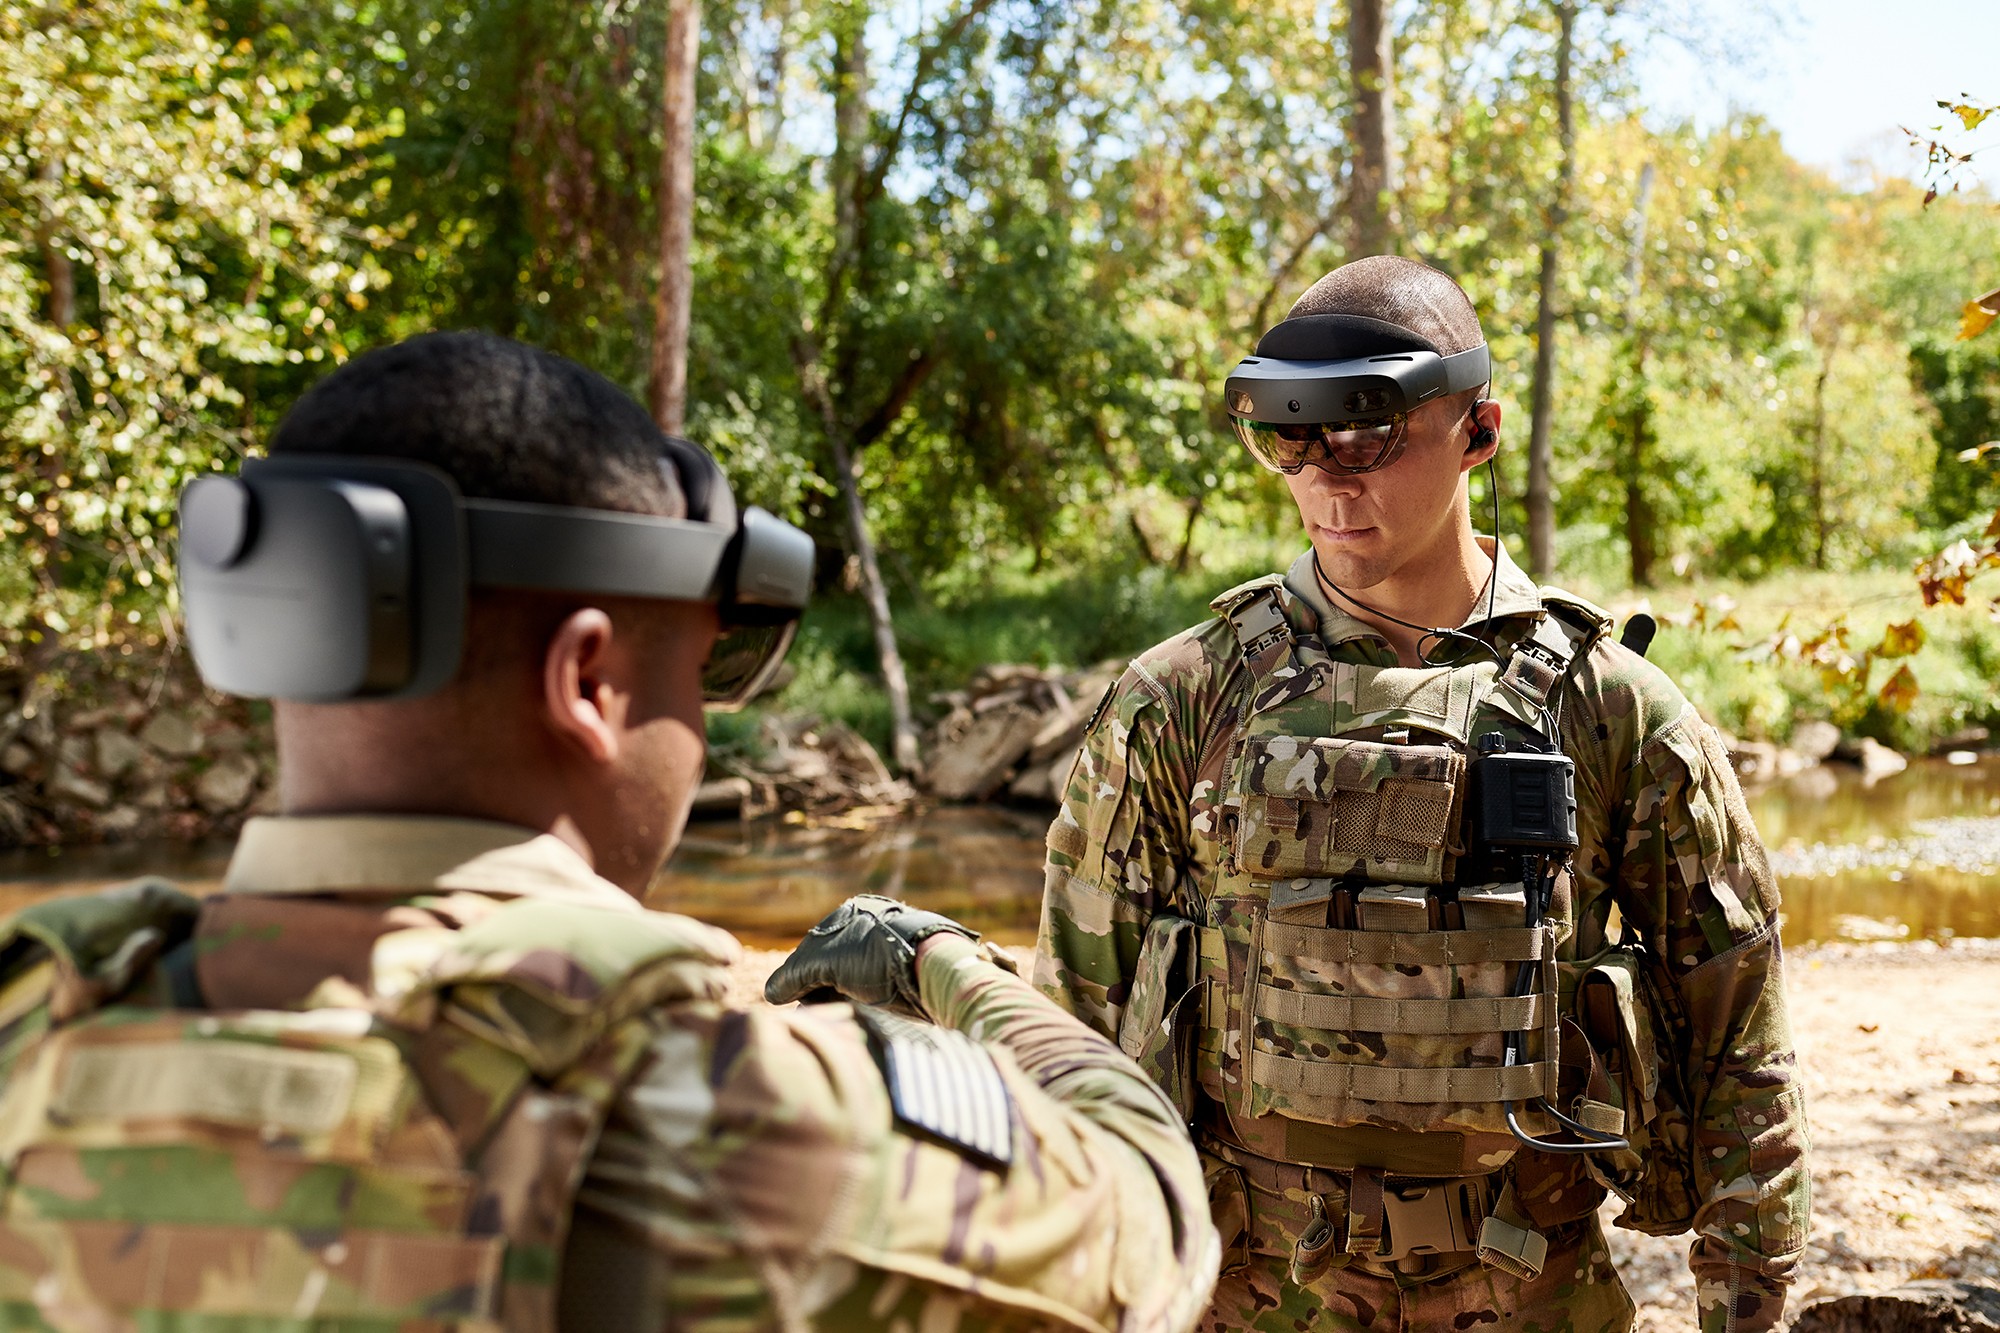 Soldiers test new IVAS technology, capabilities with hand-on exercises | Article | The United States Army